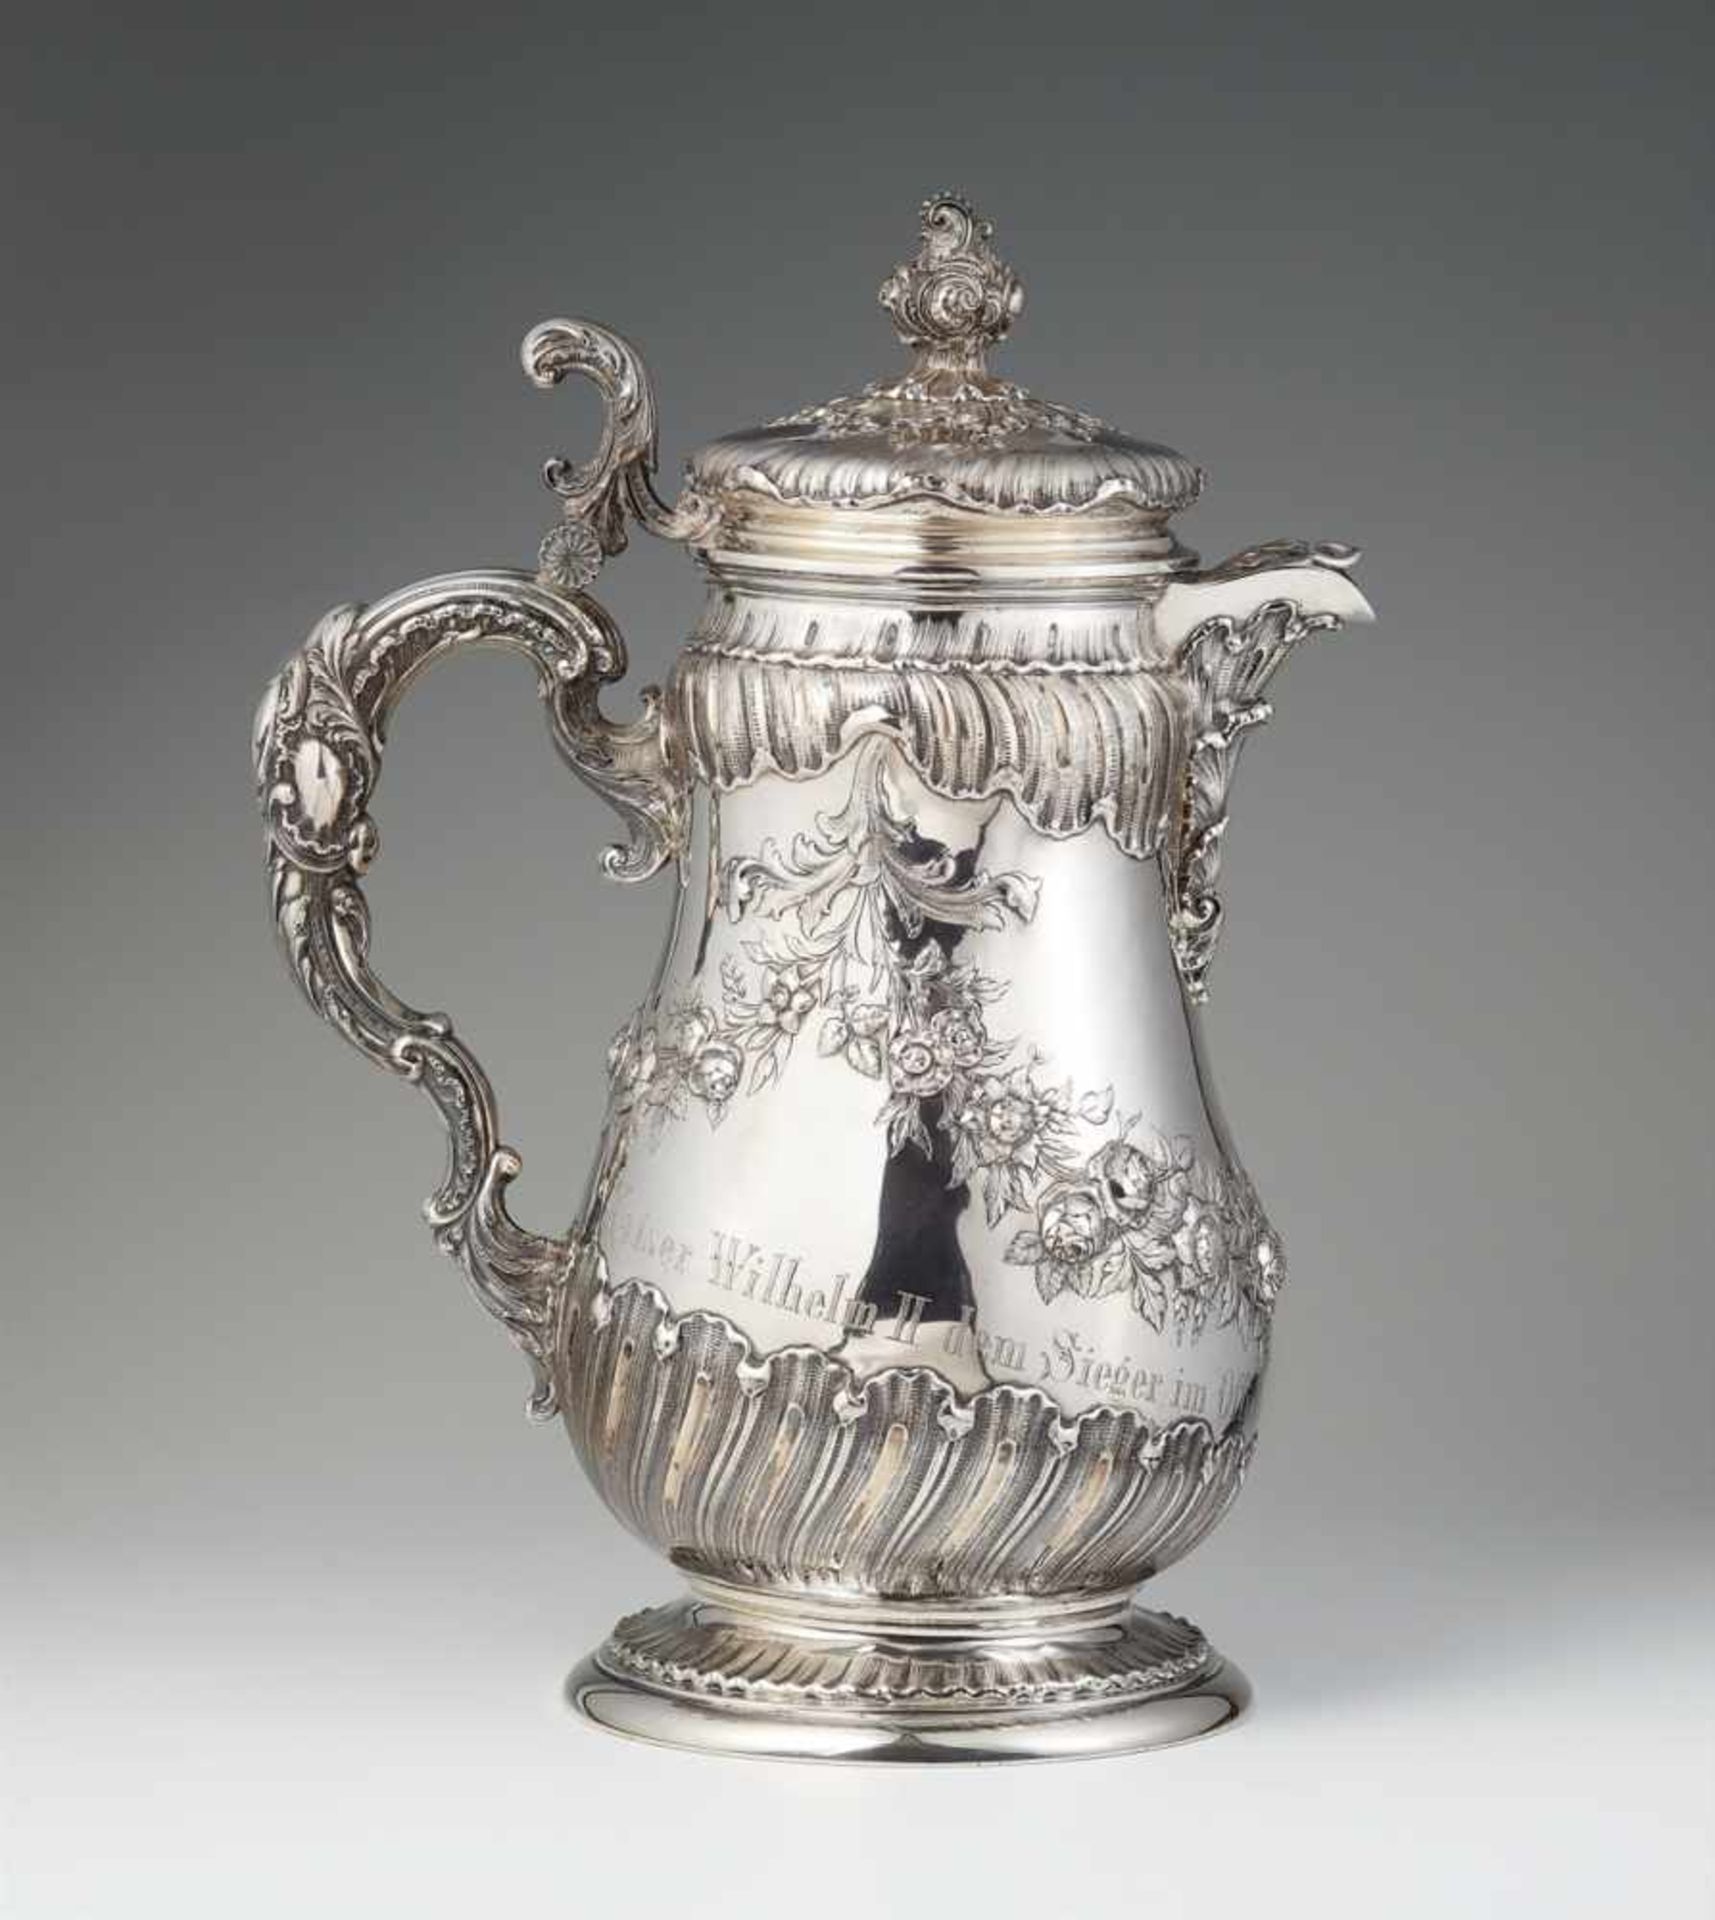 A Berlin silver horse racing trophyA large pear-form pitcher with slip lid, engraved "Kaiser Wilhelm